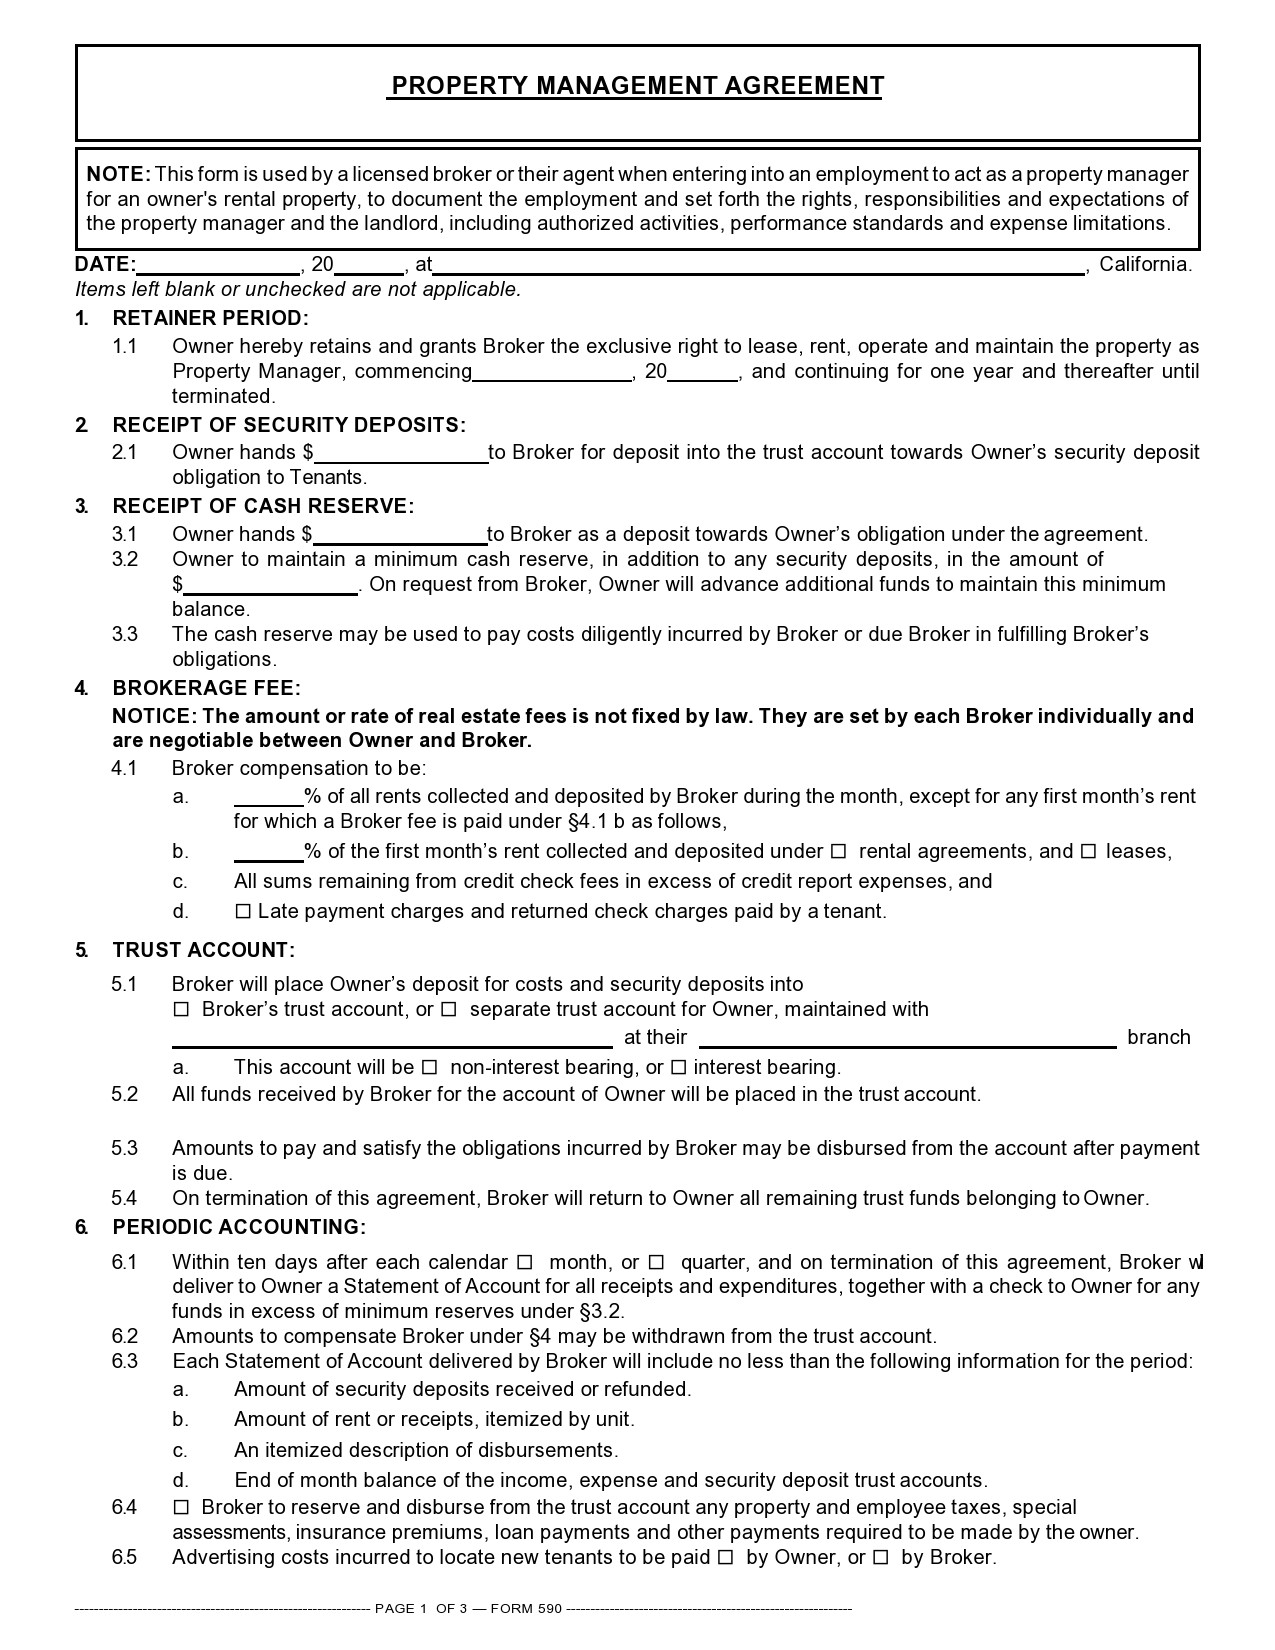 Free property management agreement 01